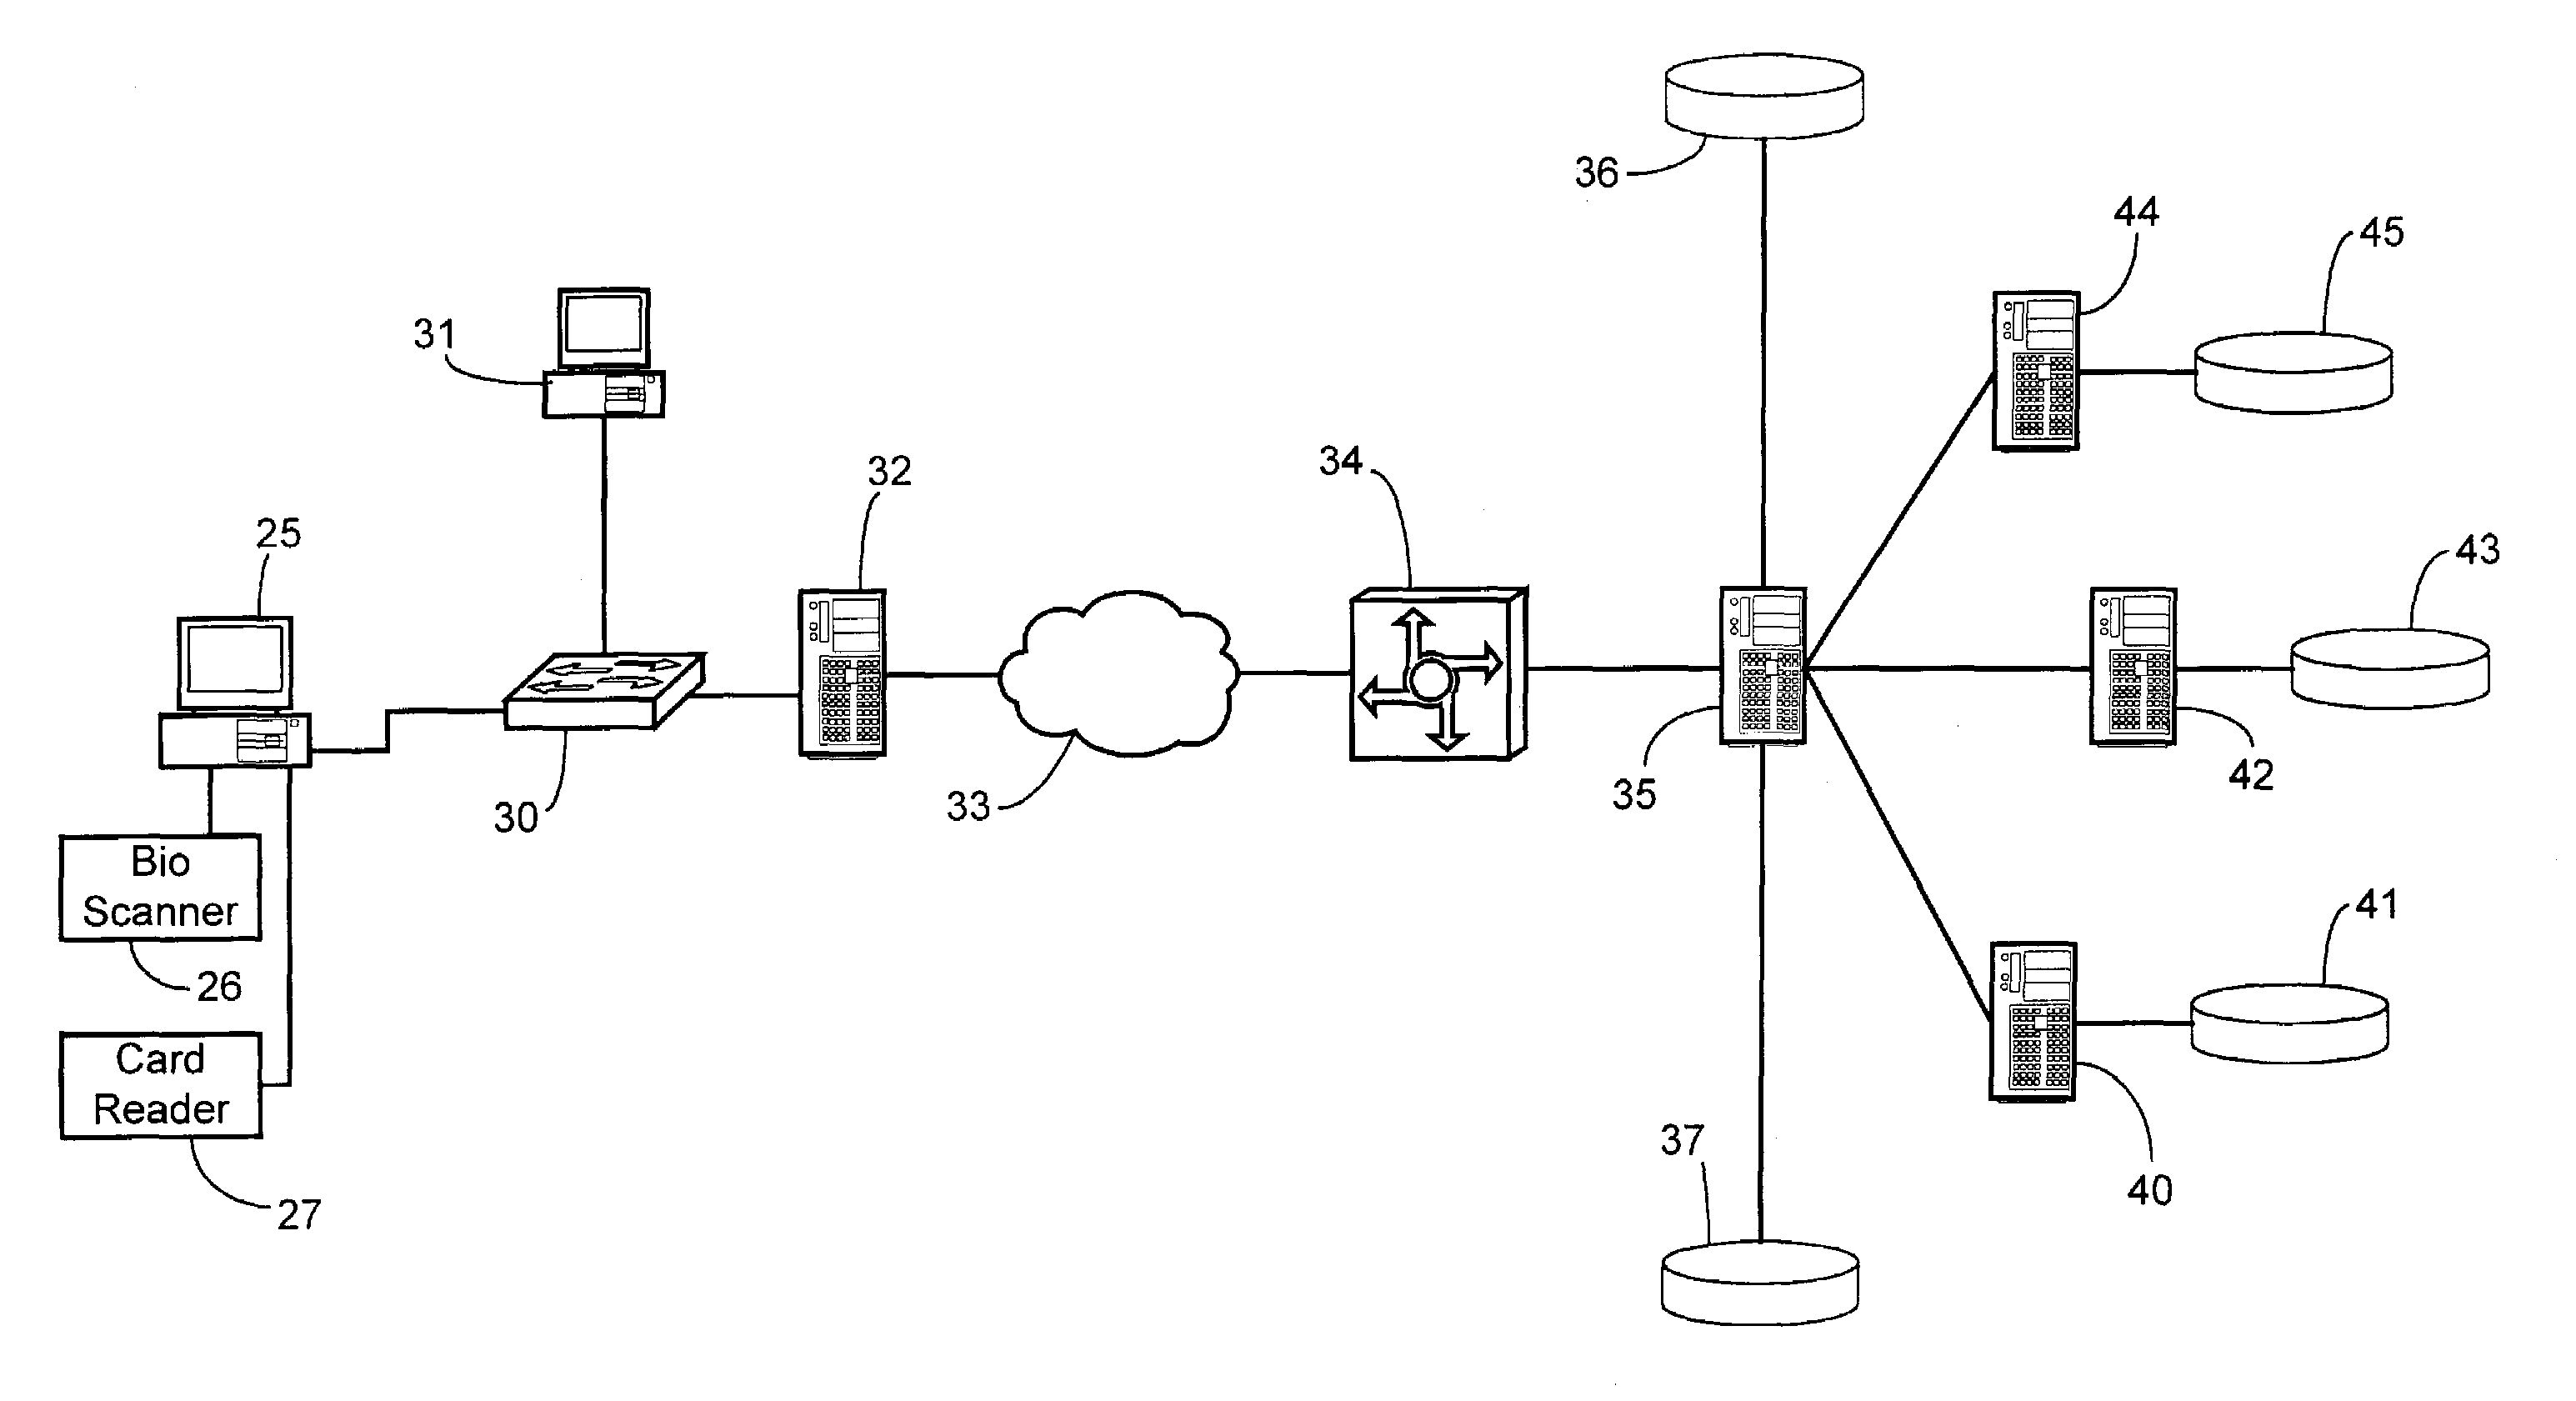 Biometric authentication of a client network connection